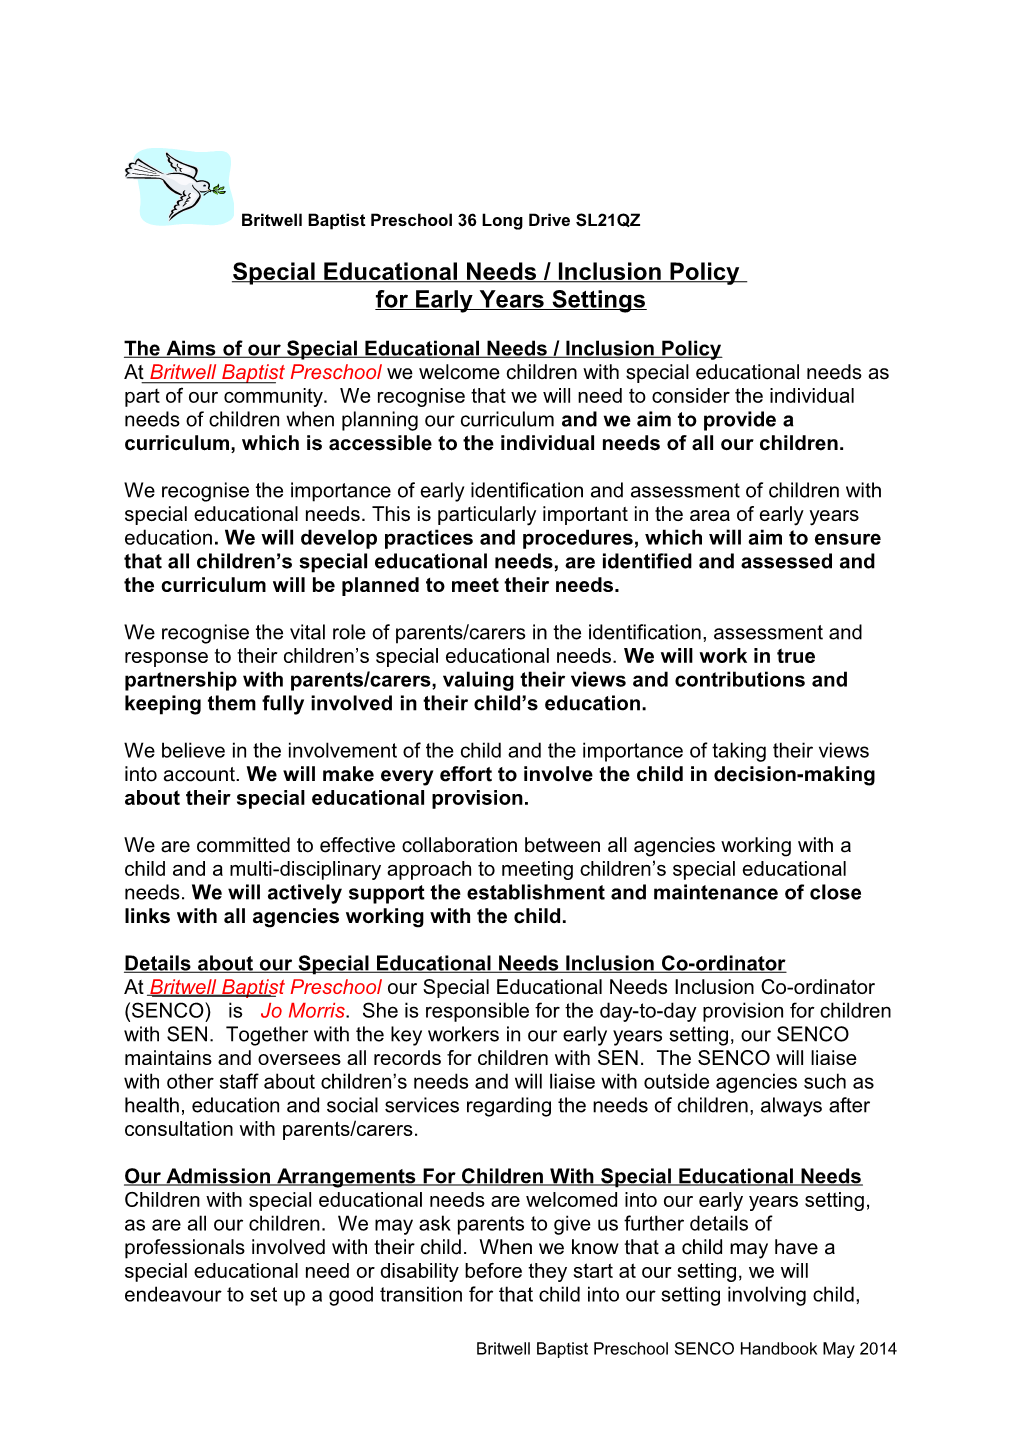 Sample Special Educational Needs / Inclusion Policy in Early Years Settings